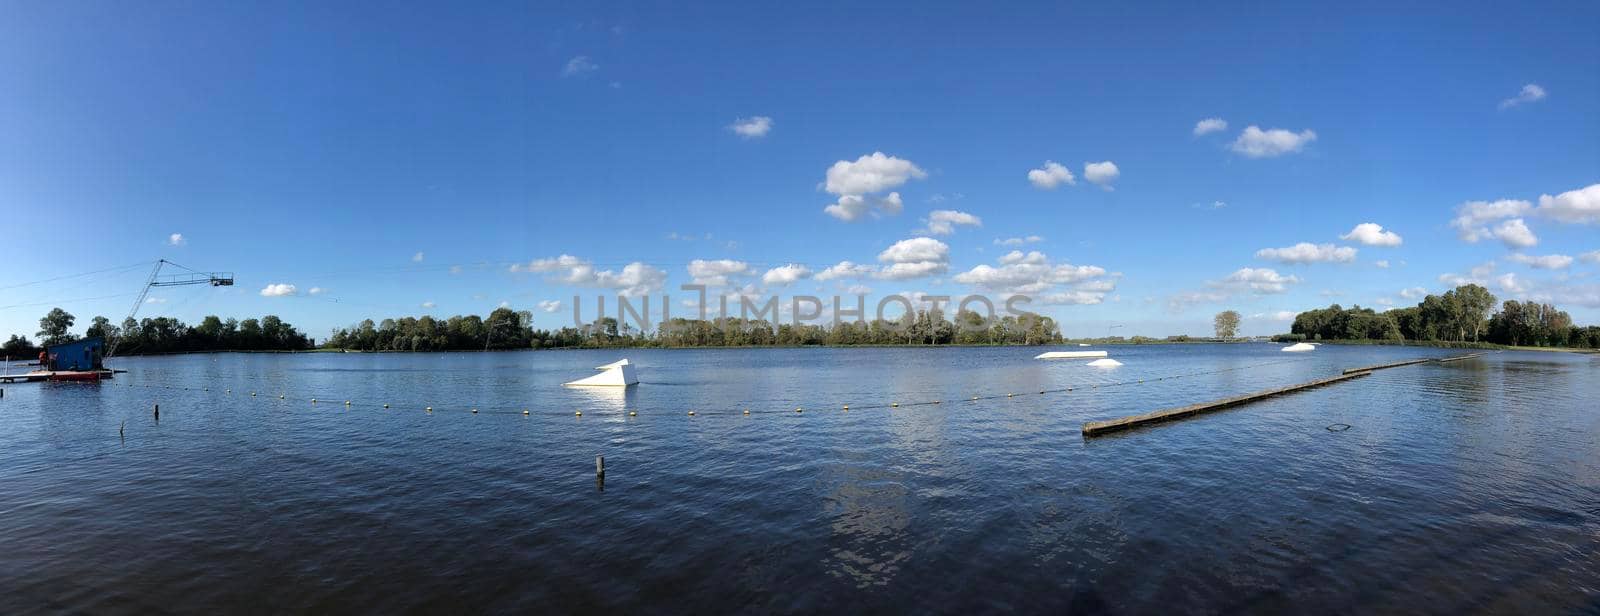 Panorama from the water ski course  by traveltelly